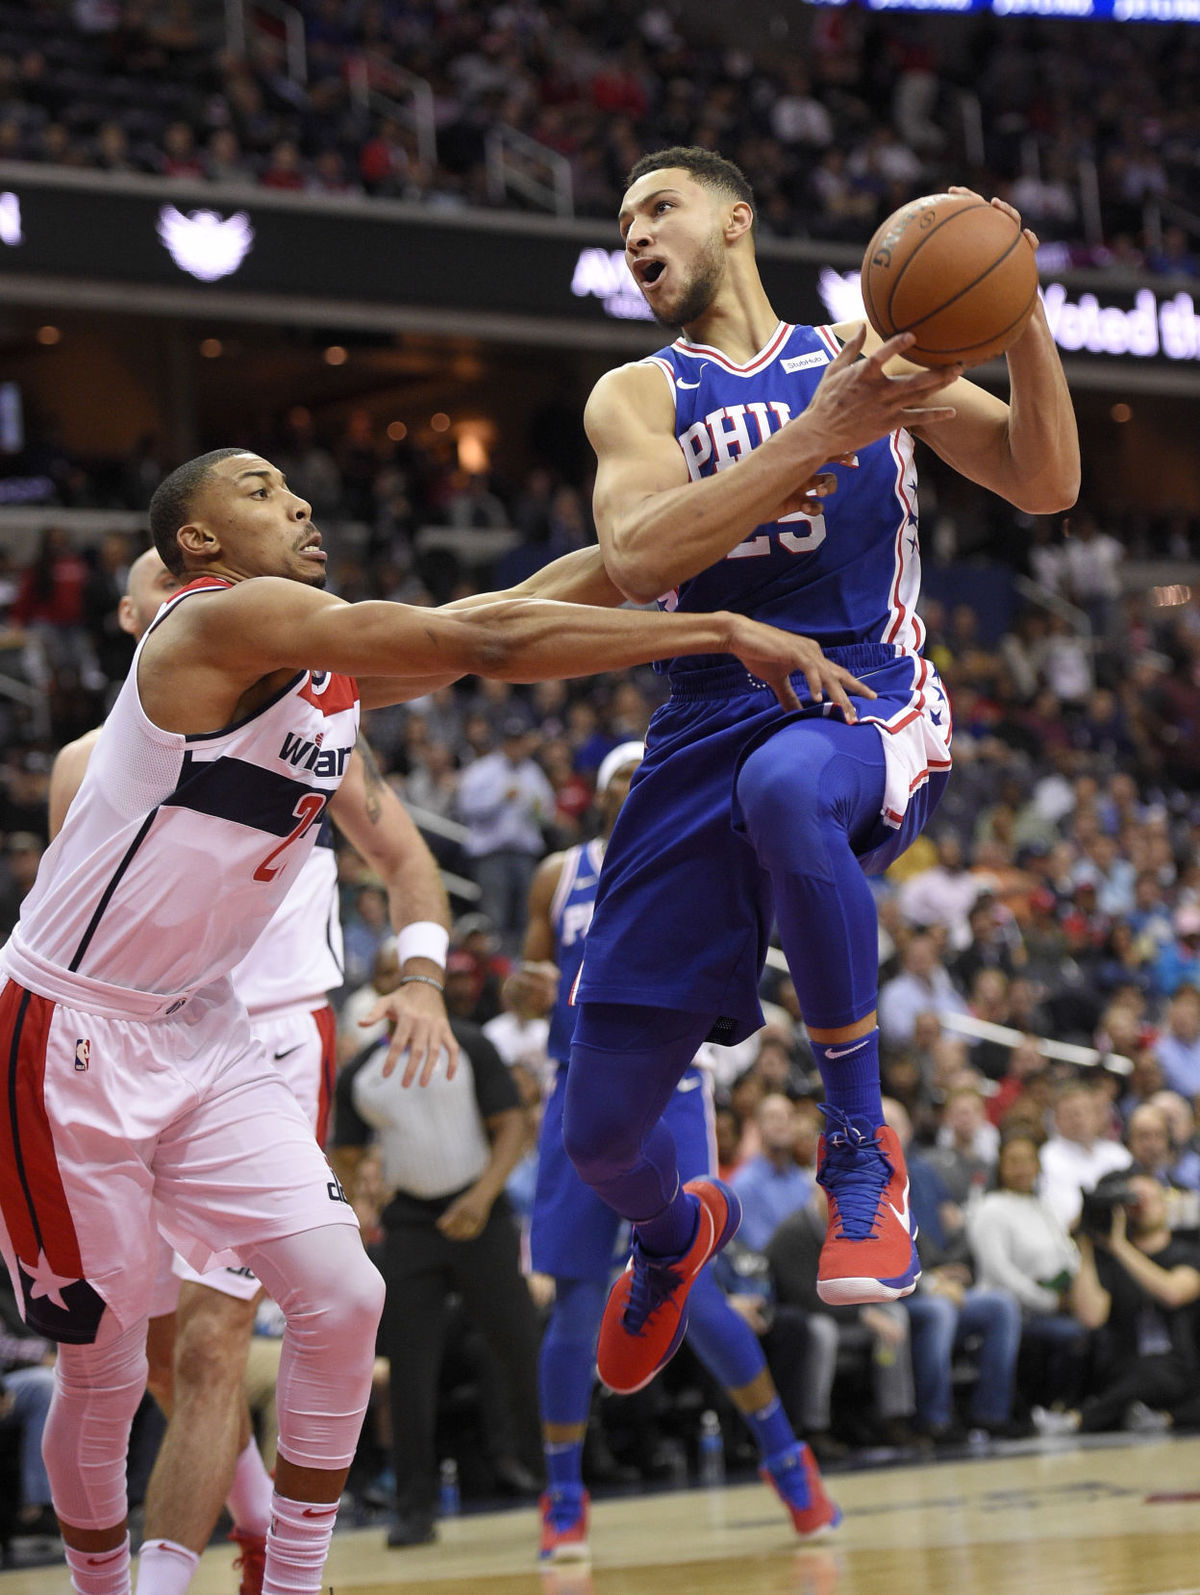 Video:  Ben Simmons Shines In His Debut Despite Loss To Wizards